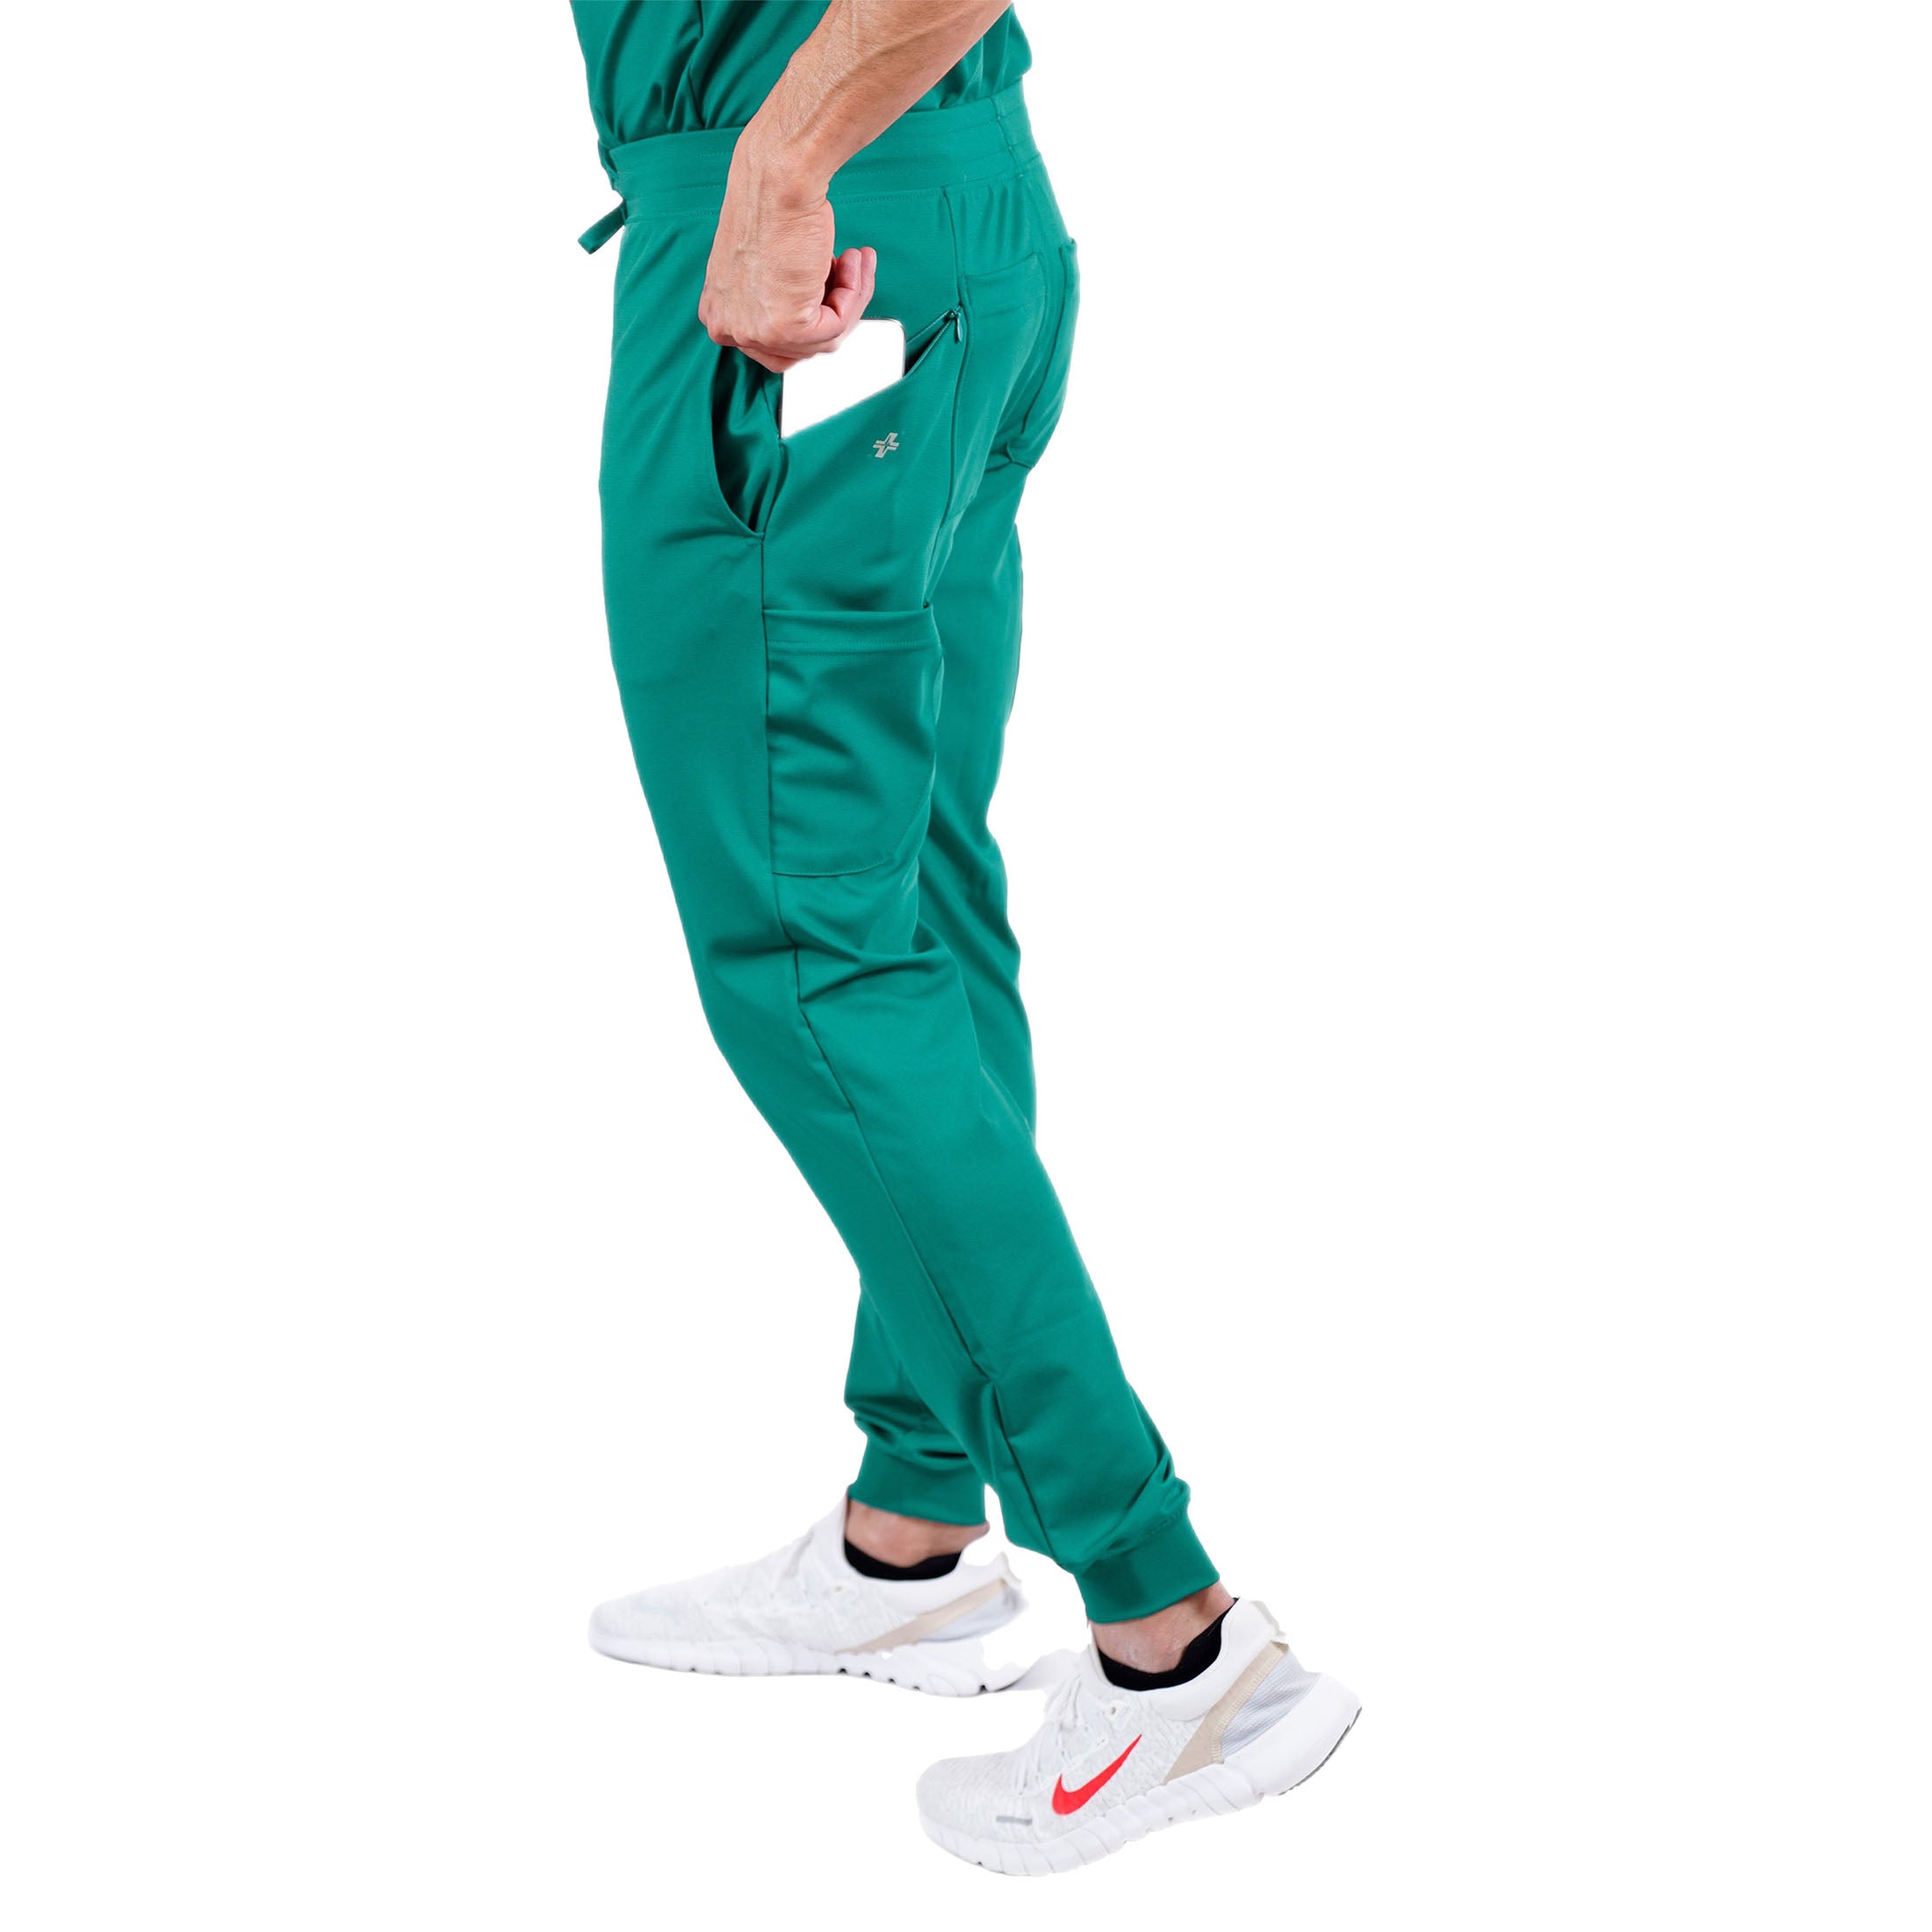 How To Find The Perfect Pair of Jogger Scrubs - Care+Wear